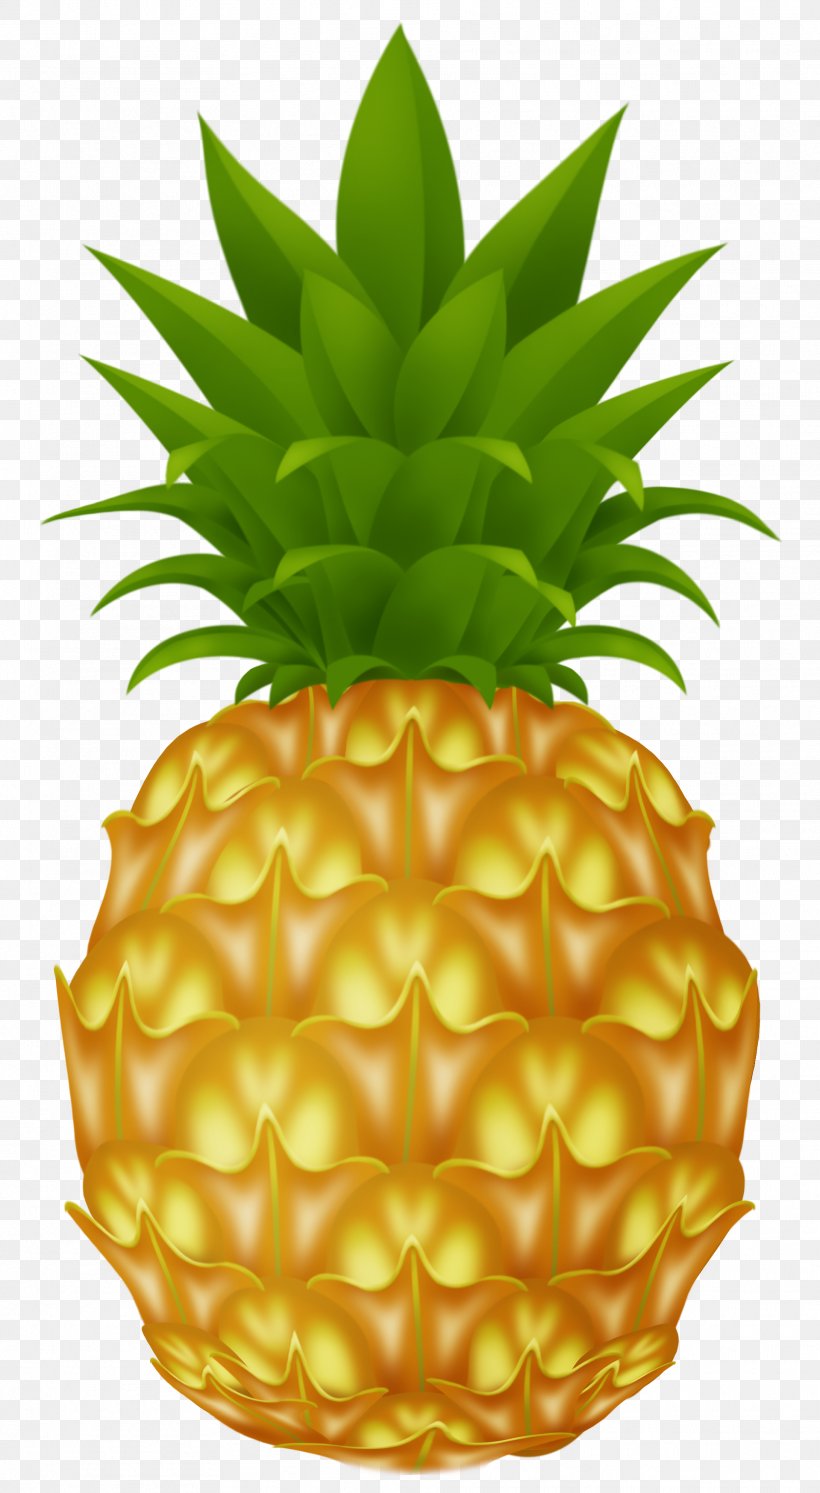 Pineapple Cartoon Clip Art, PNG, 1919x3495px, South India, Ananas, Bromeliaceae, Food, Fruit Download Free